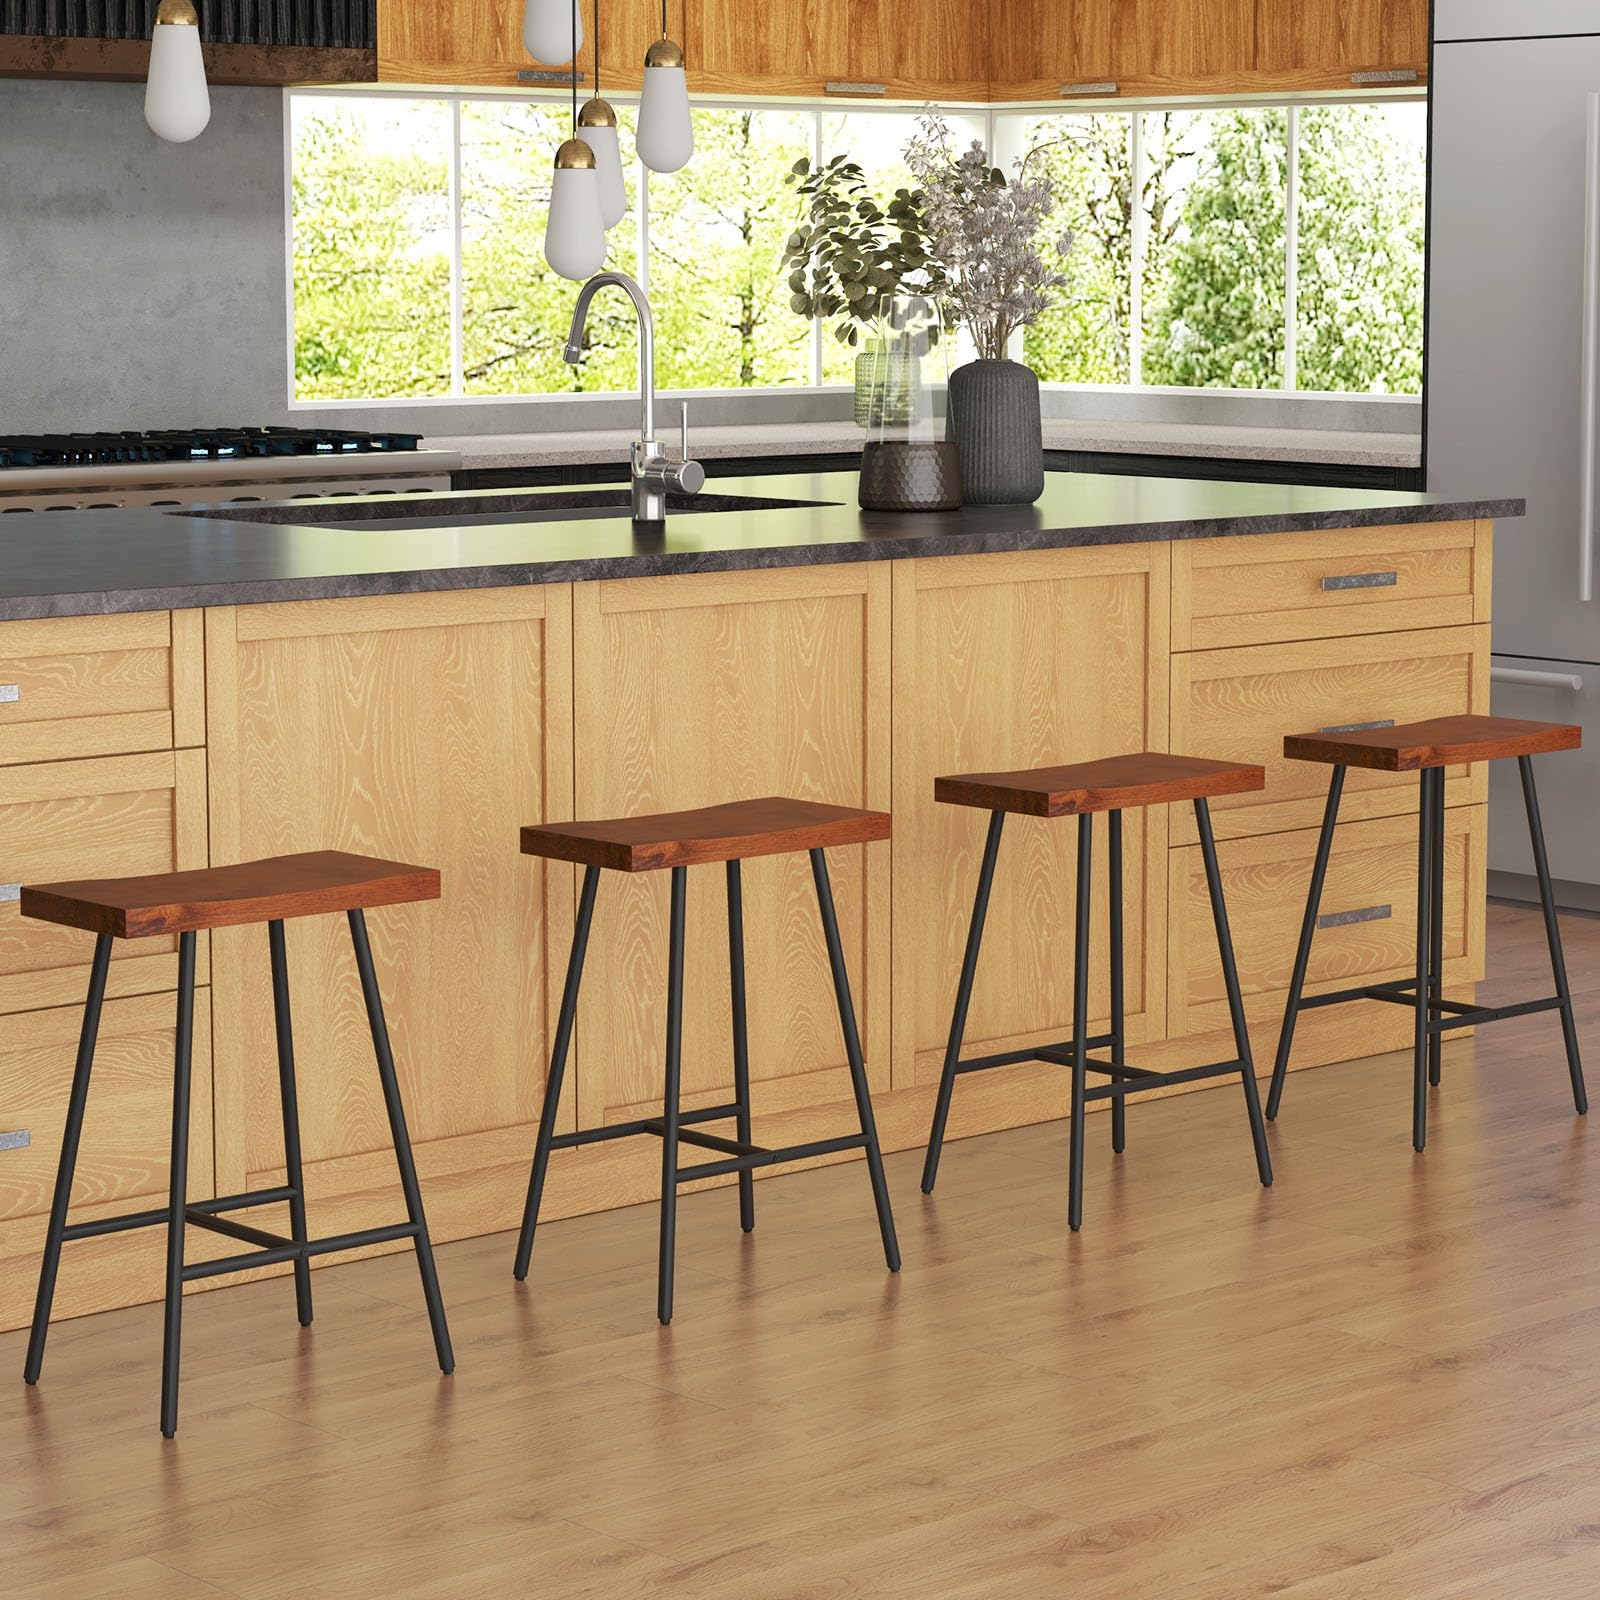 Giantex 24" Bar Stools Set of 2, Counter Height Bar Stools with Footrests, Solid Metal Legs